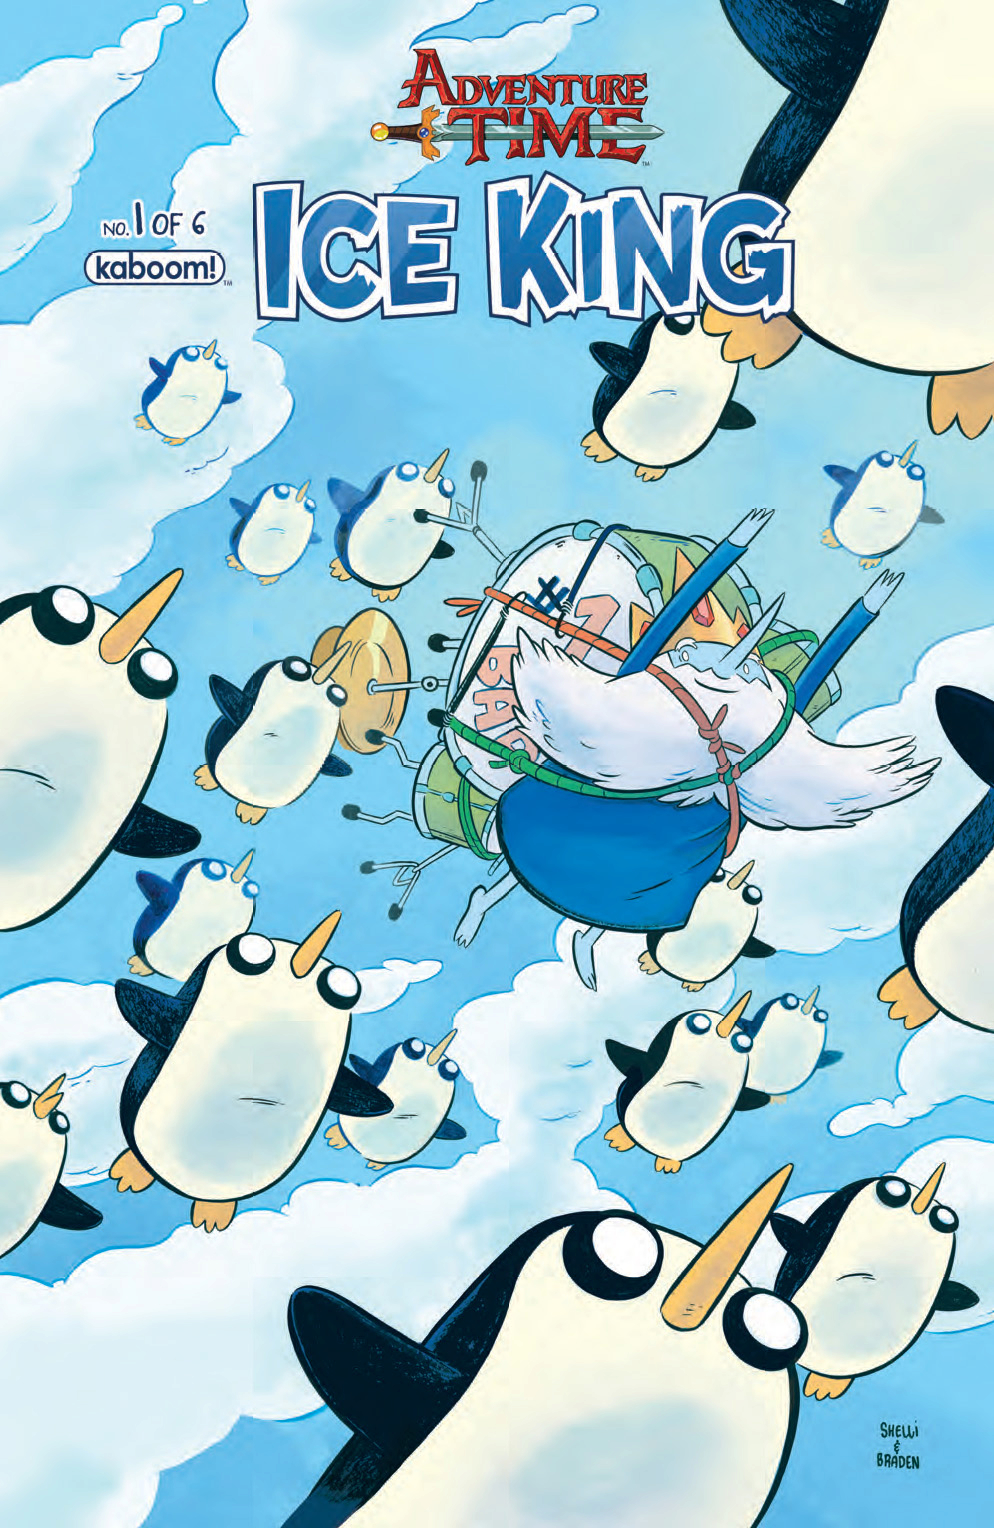 ADVENTURE TIME ICE KING #1